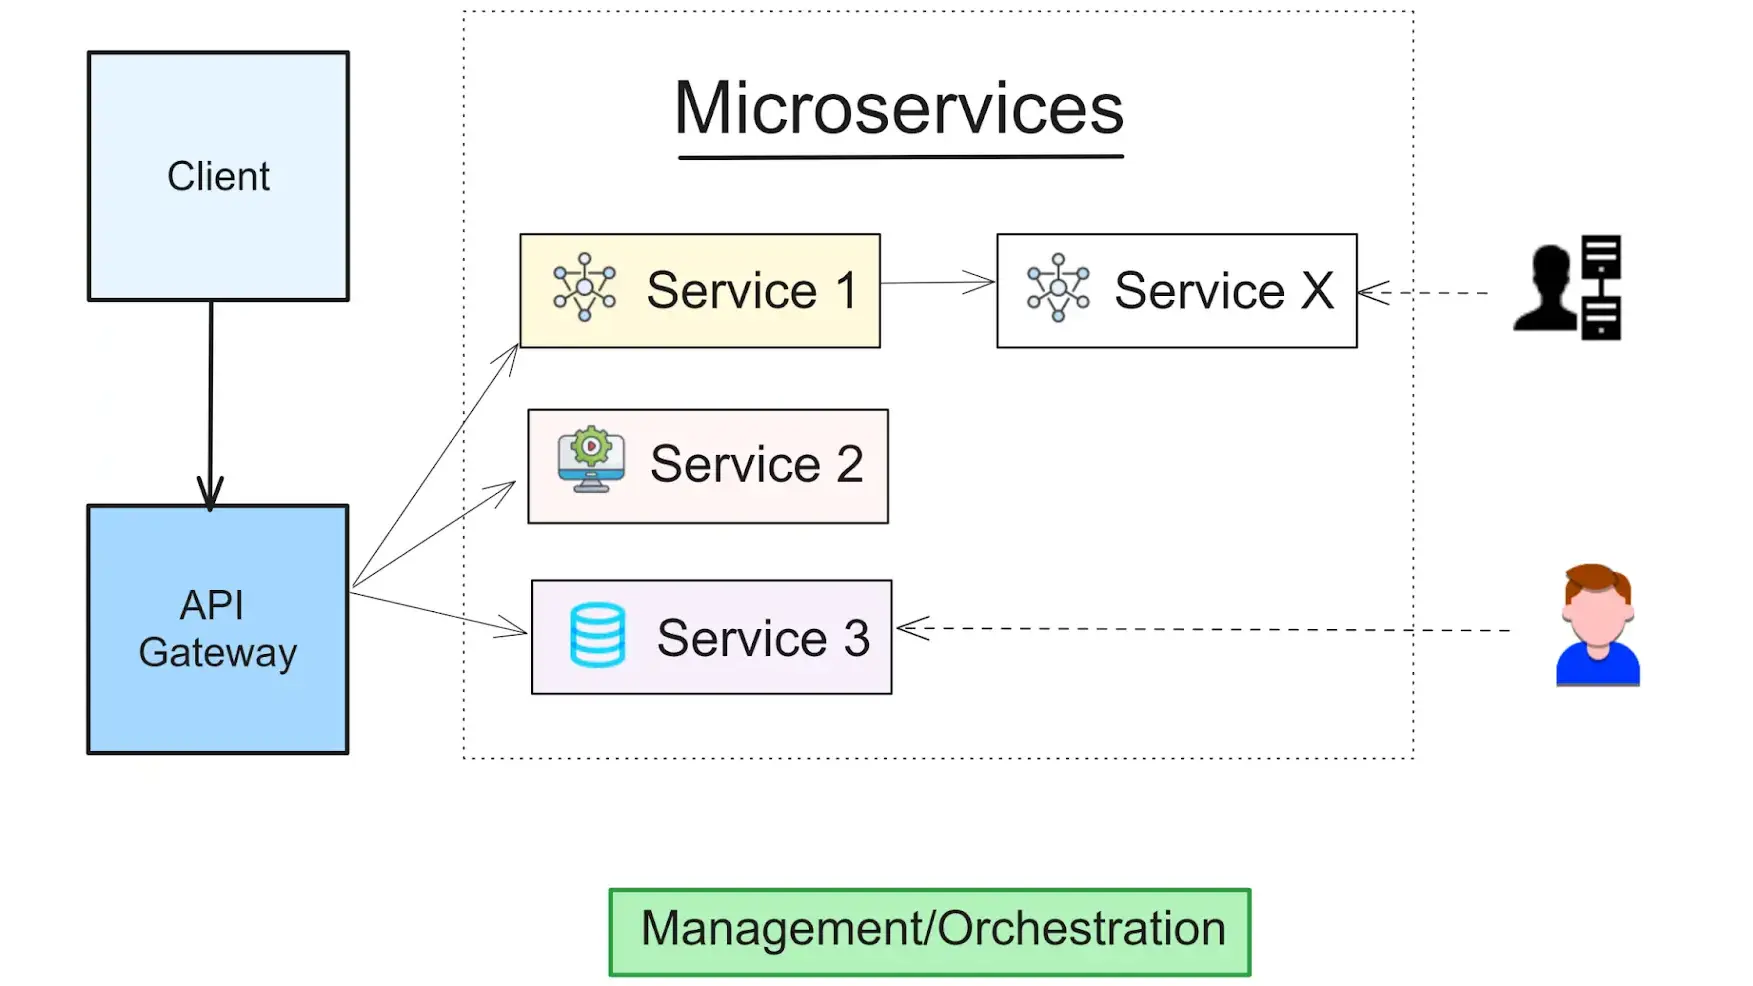 Overview of microservice architecture, cloud-based functionality, securing microservices, API gateways, and implementing a DevSecOps approach for multi-cloud security.